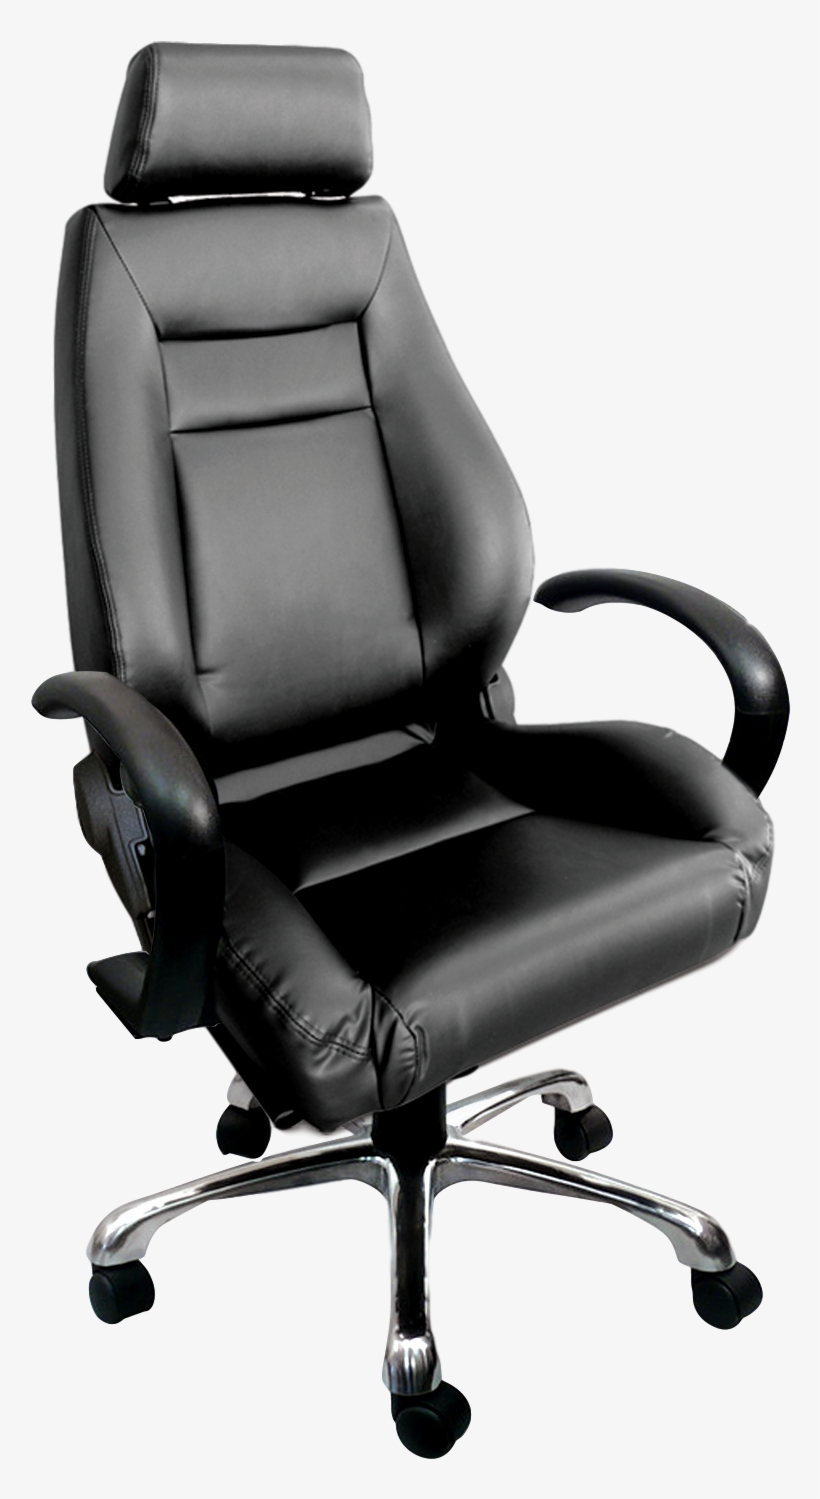 Elite Office Chair Office Chairs High Back Free Transparent Png Download Pngkey